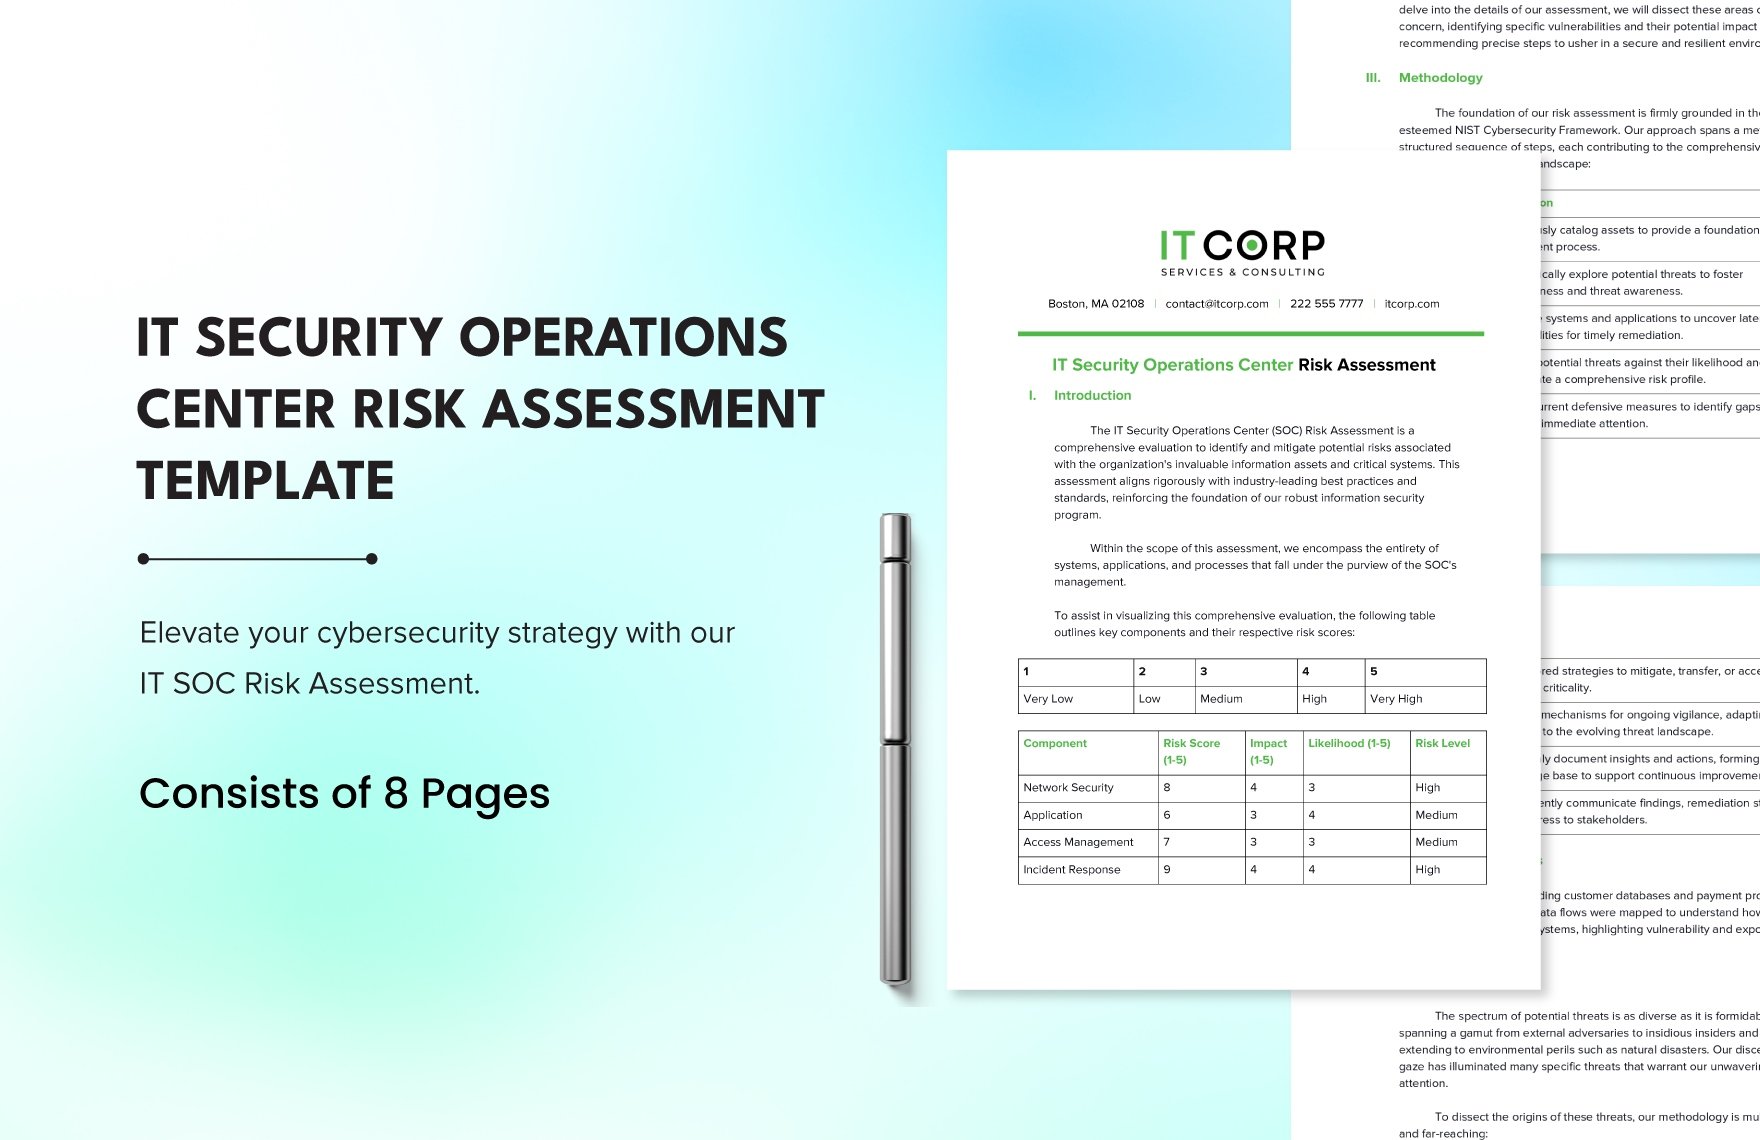 IT Security Operations Center Risk Assessment Template